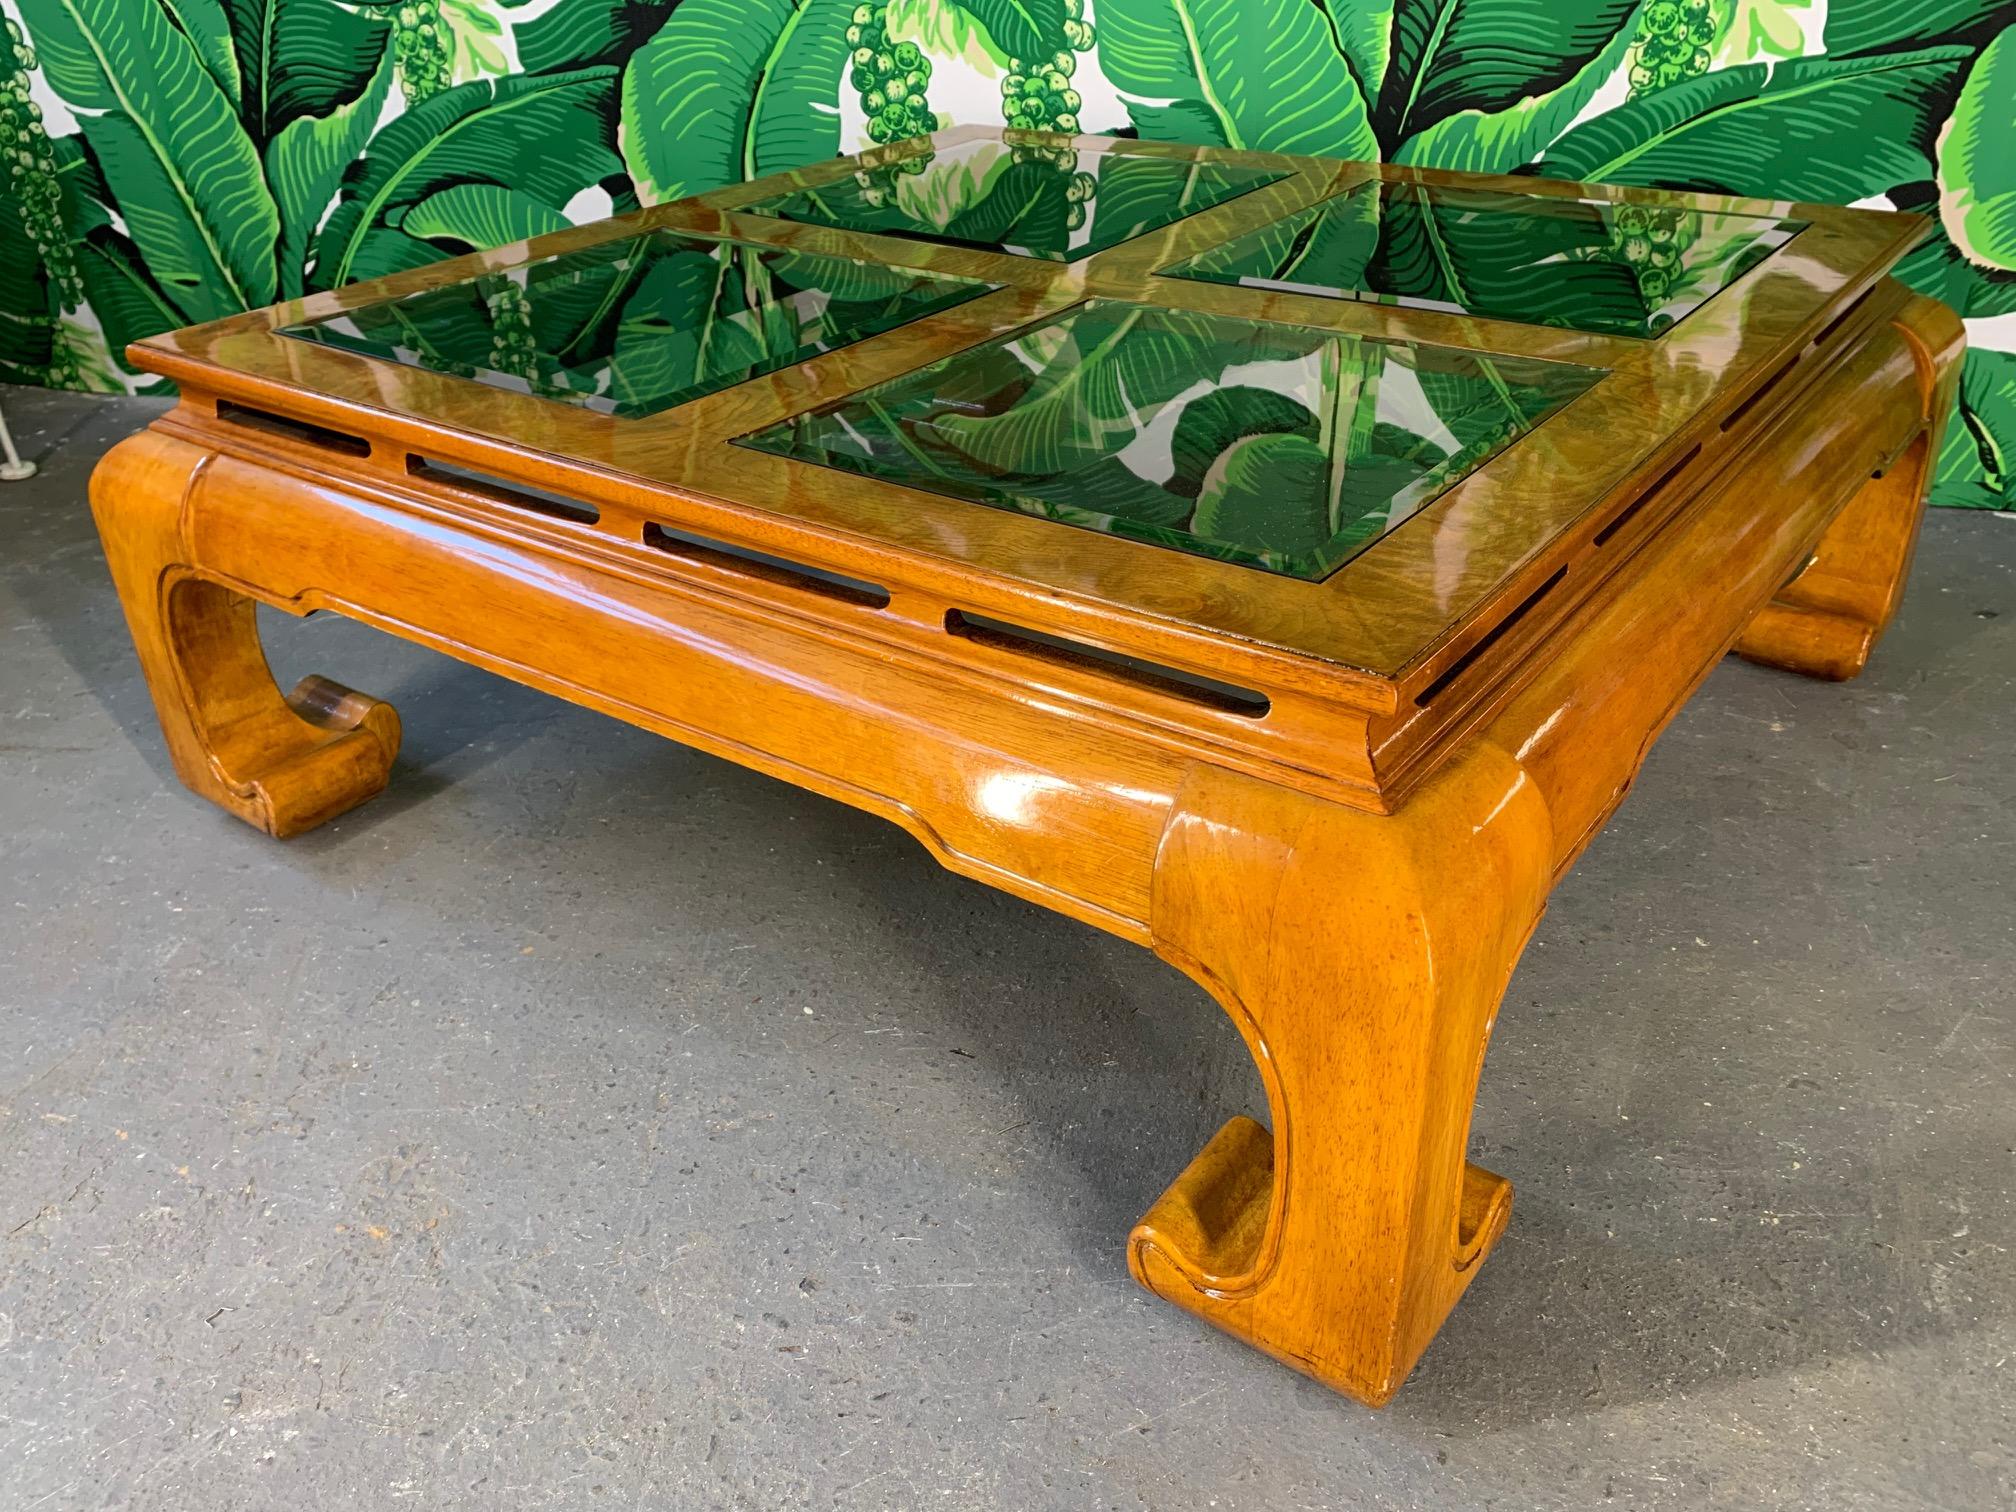 Ming Asian style coffee table features smoked beveled glass inserts and high gloss lacquer finish. Very good condition. Perfect touch of chinoiserie style for any decor.